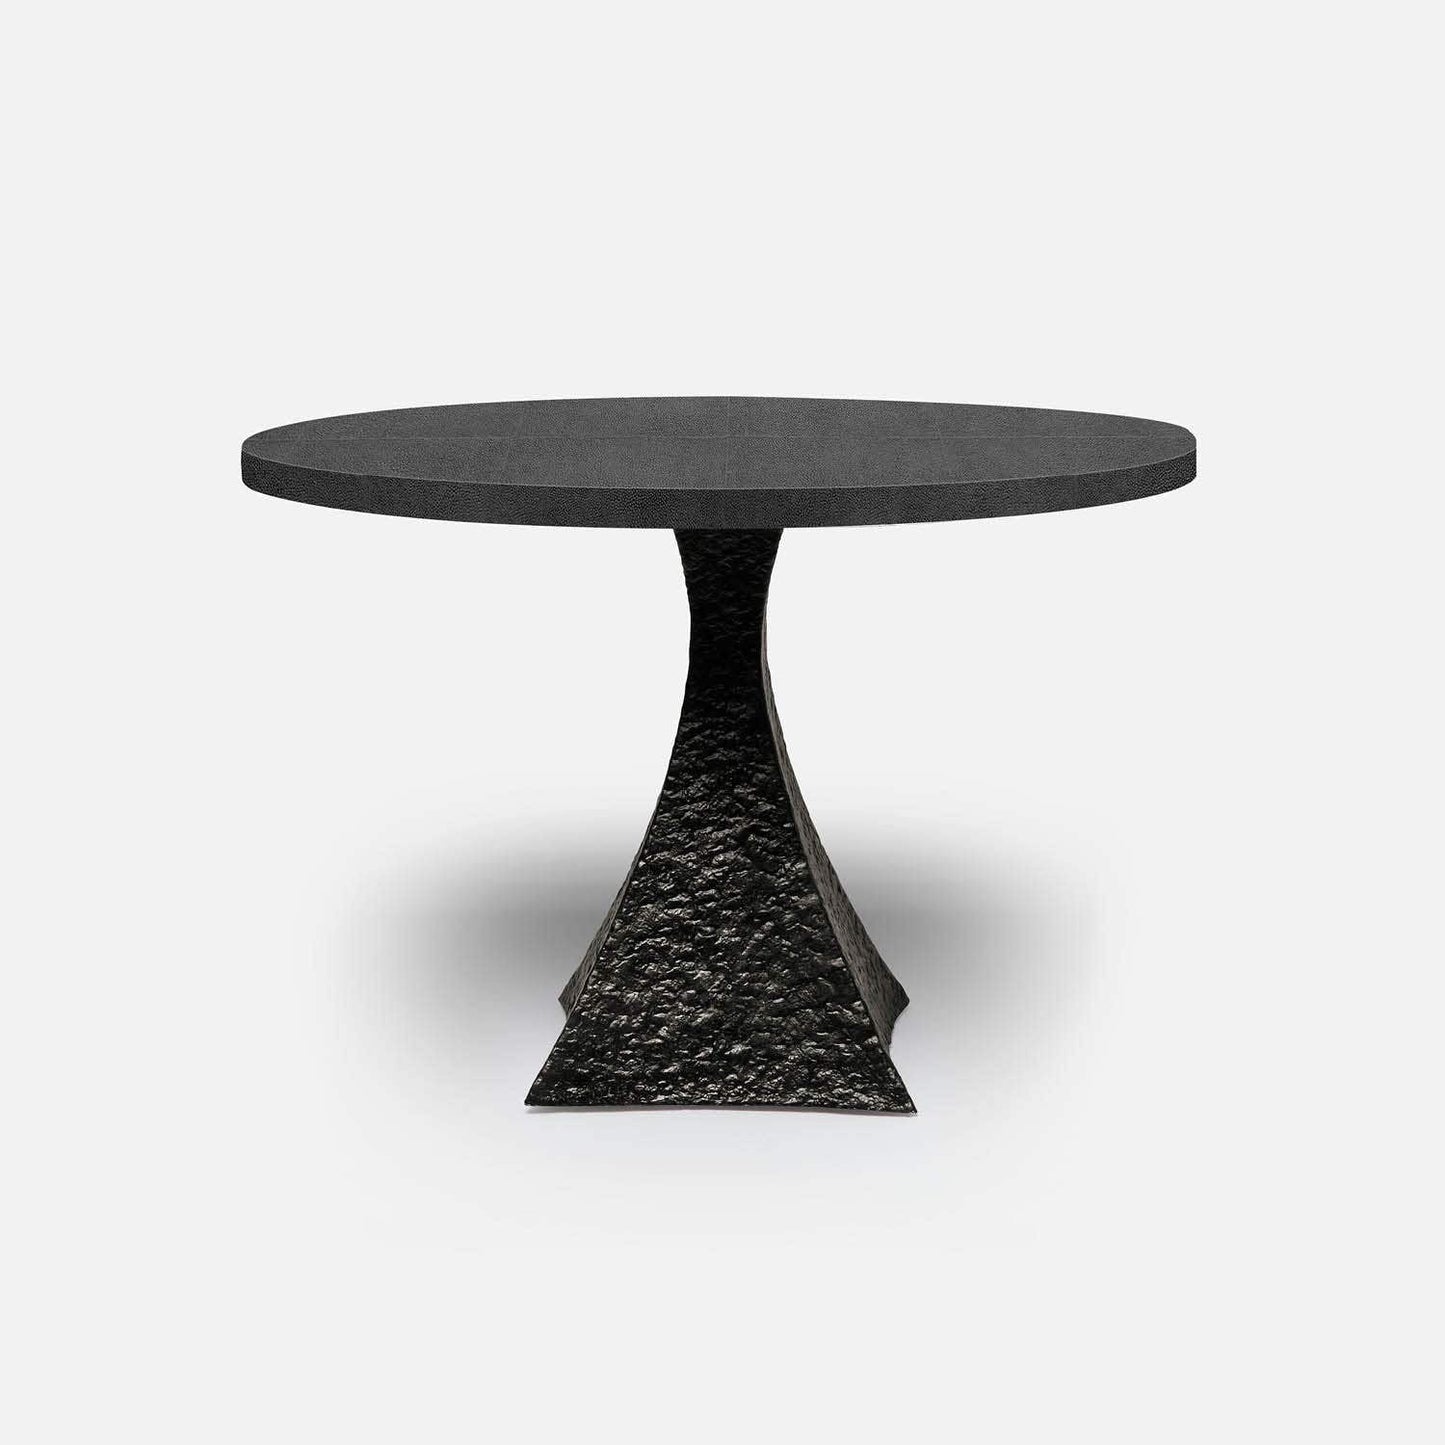 Made Goods Noor 72" x 30" Bumpy Black Iron Dinning Table With Round Black Vintage Faux Shagreen Table Top